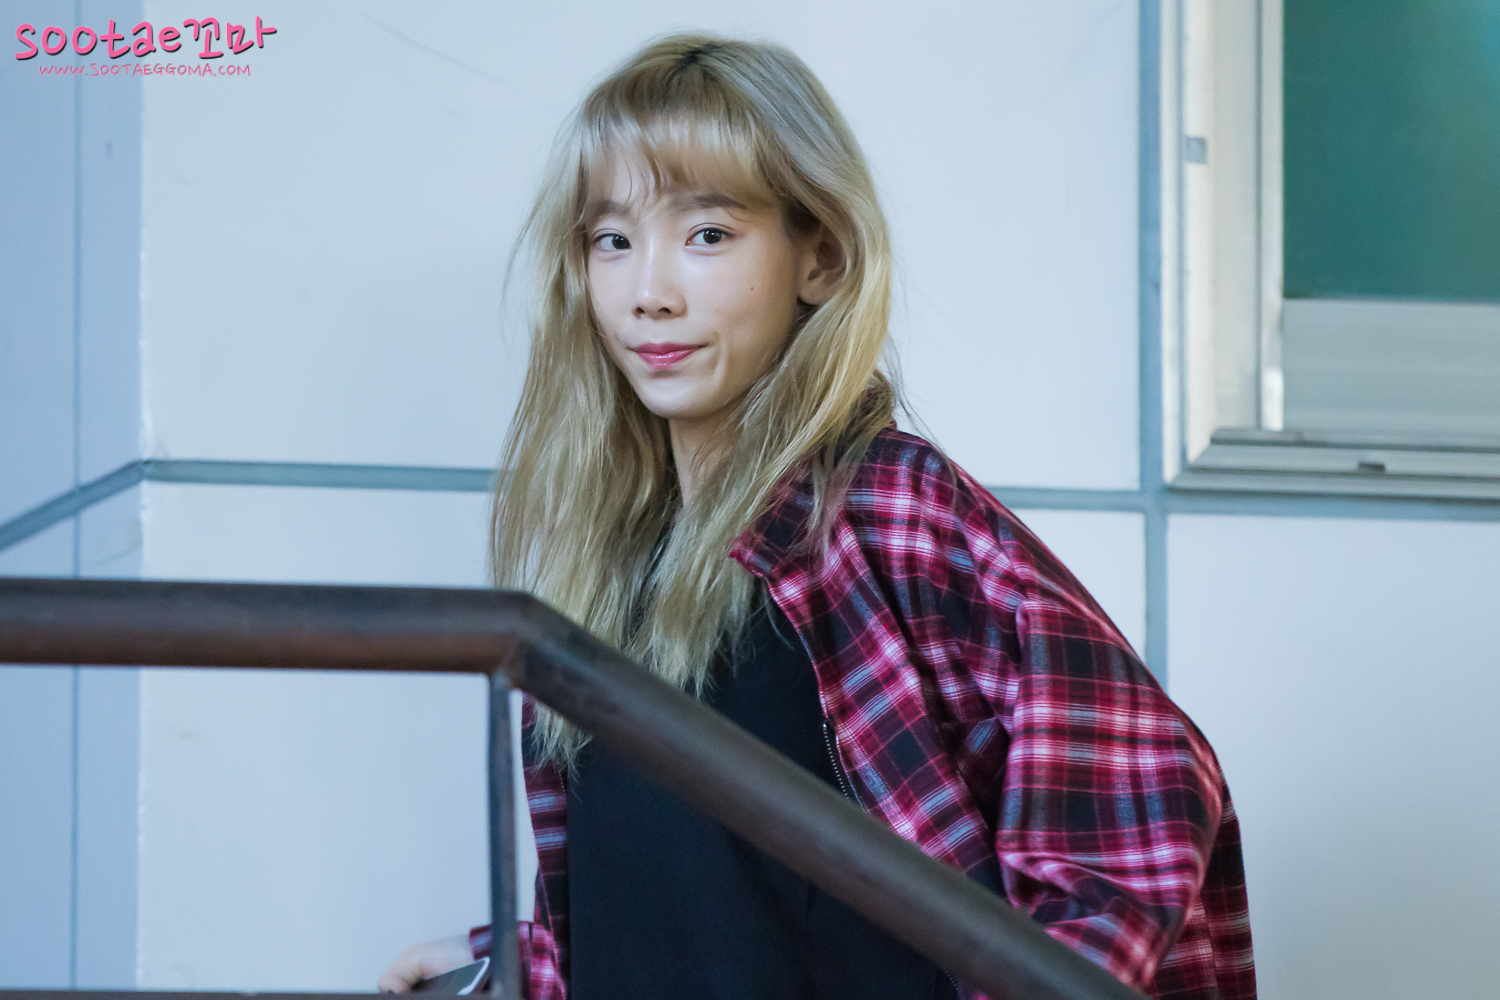 [PIC][17-09-2015]TaeYeon tổ chức Solo Concert "A Very Special Day" trong chuối Series Concert - "THE AGIT" của SM Entertainment tại SM COEX - Page 6 22802890601_65d5a6a0cd_o